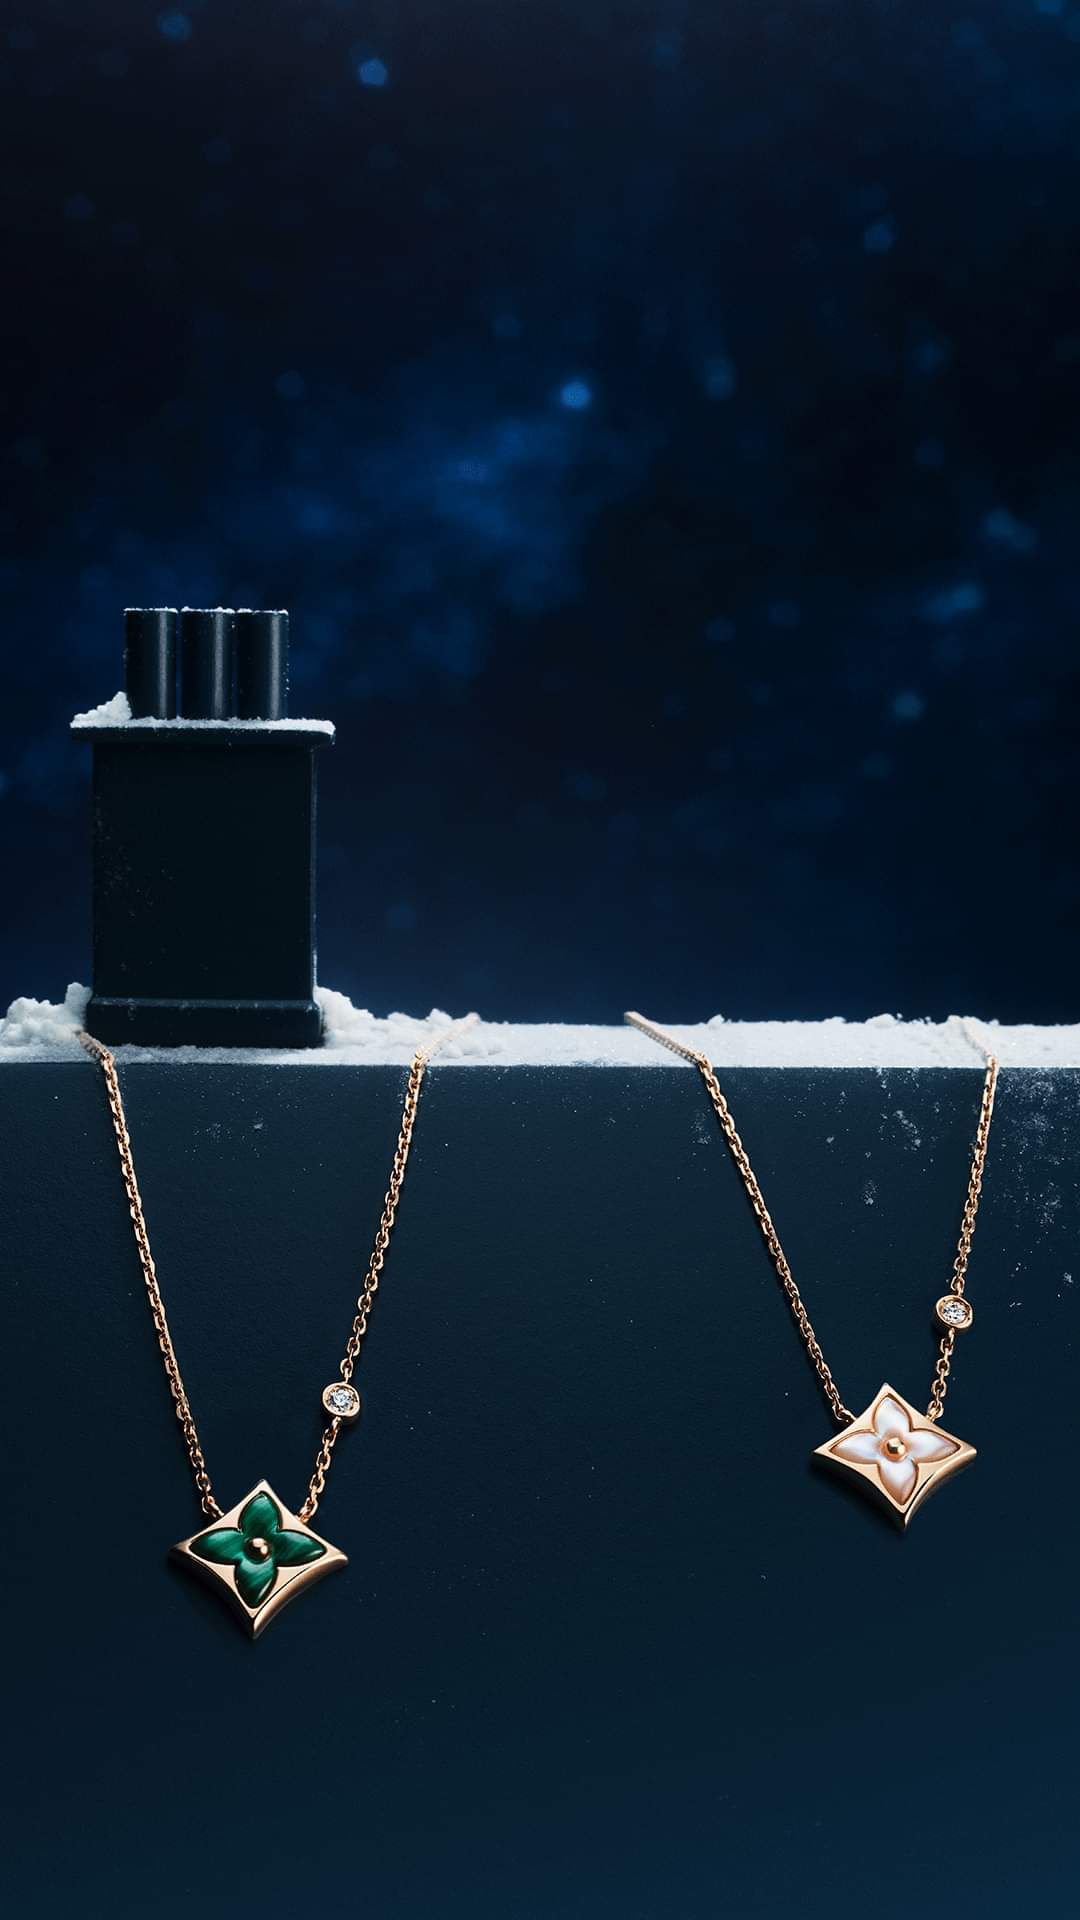 Louis Vuitton Holiday Campaign 2022 #LVGifts